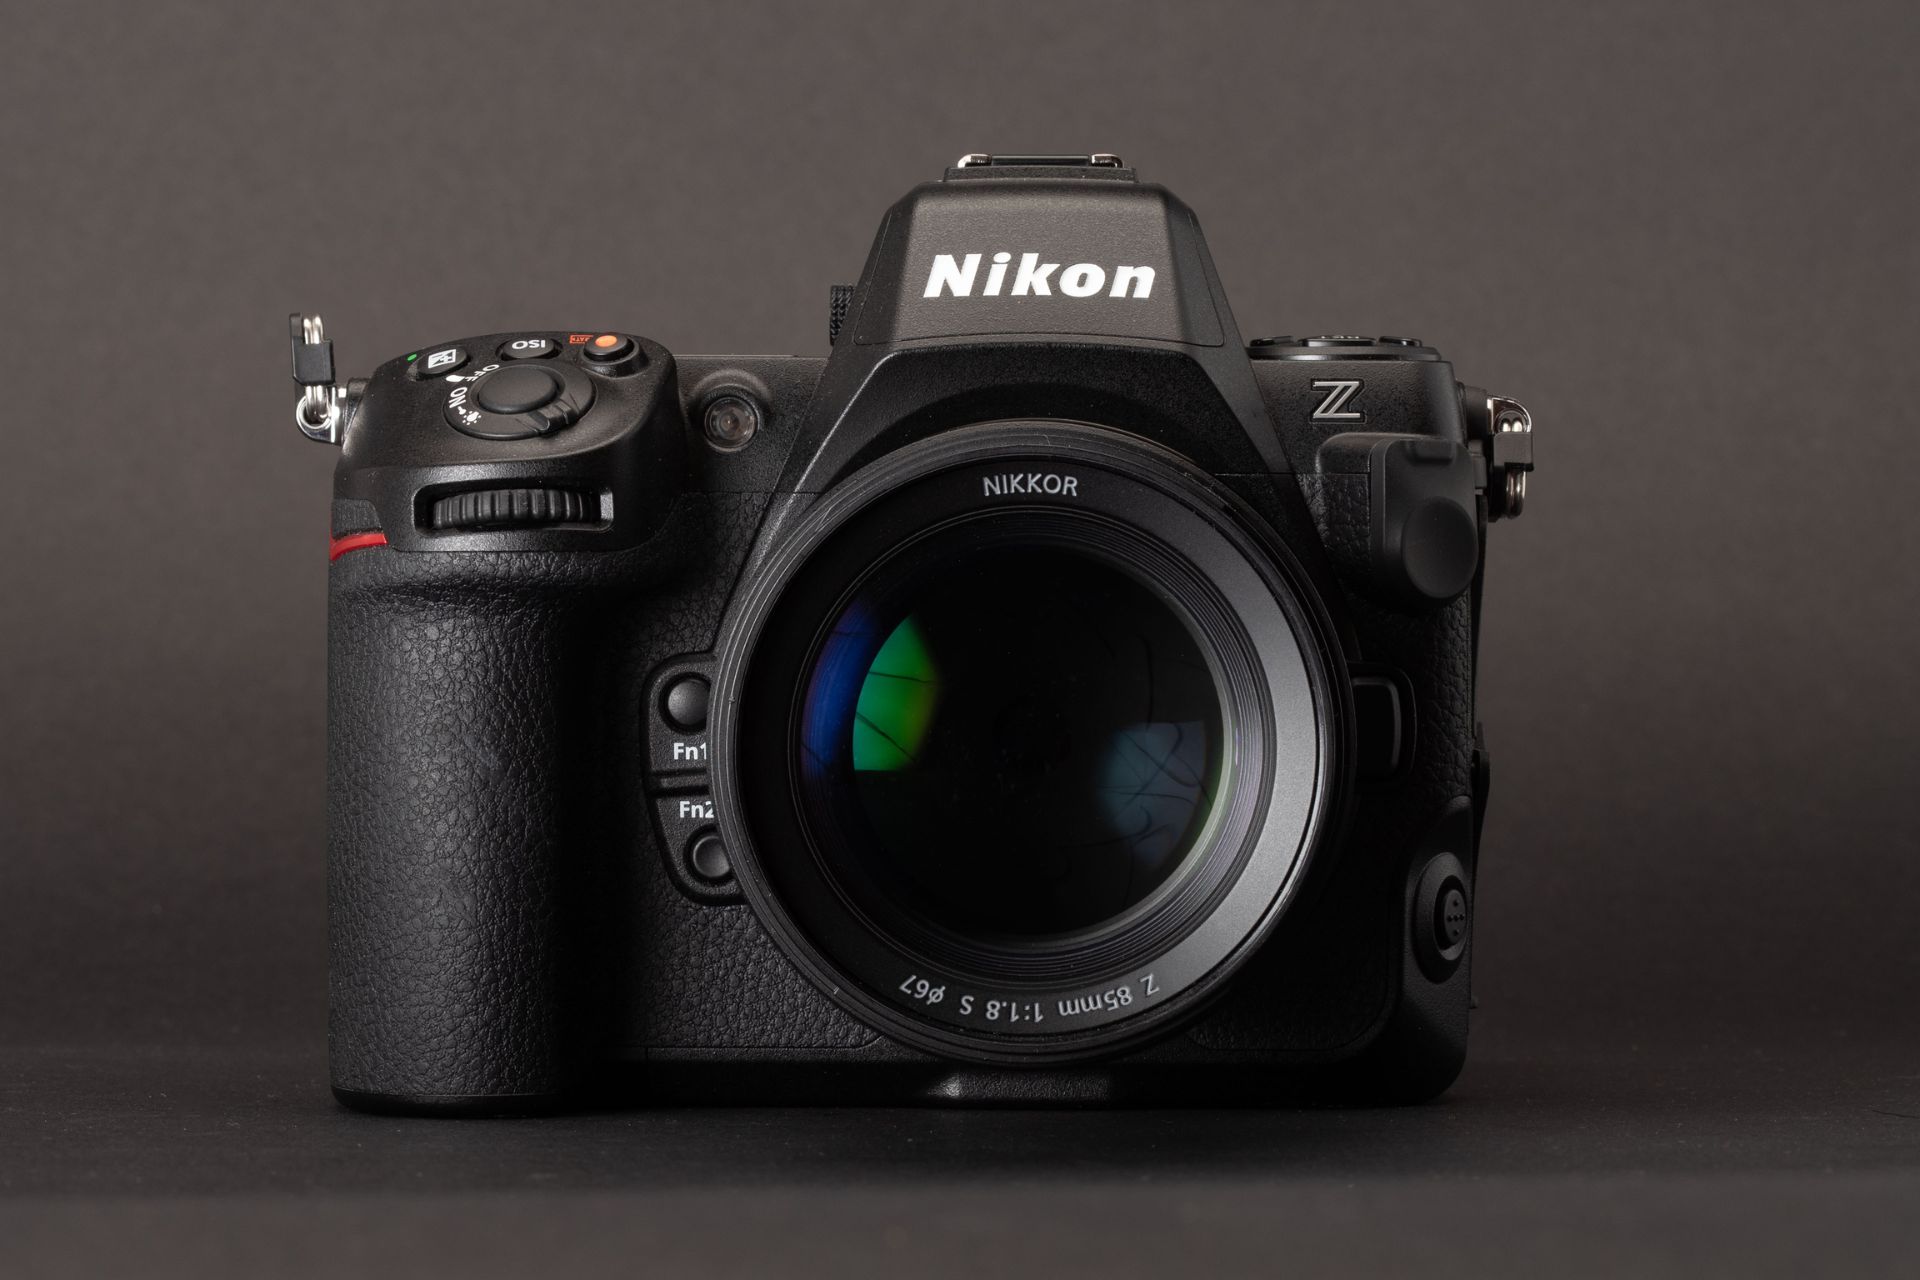 How To Activate 5 Years Of Protection Warranty For Nikon DSLR Camera